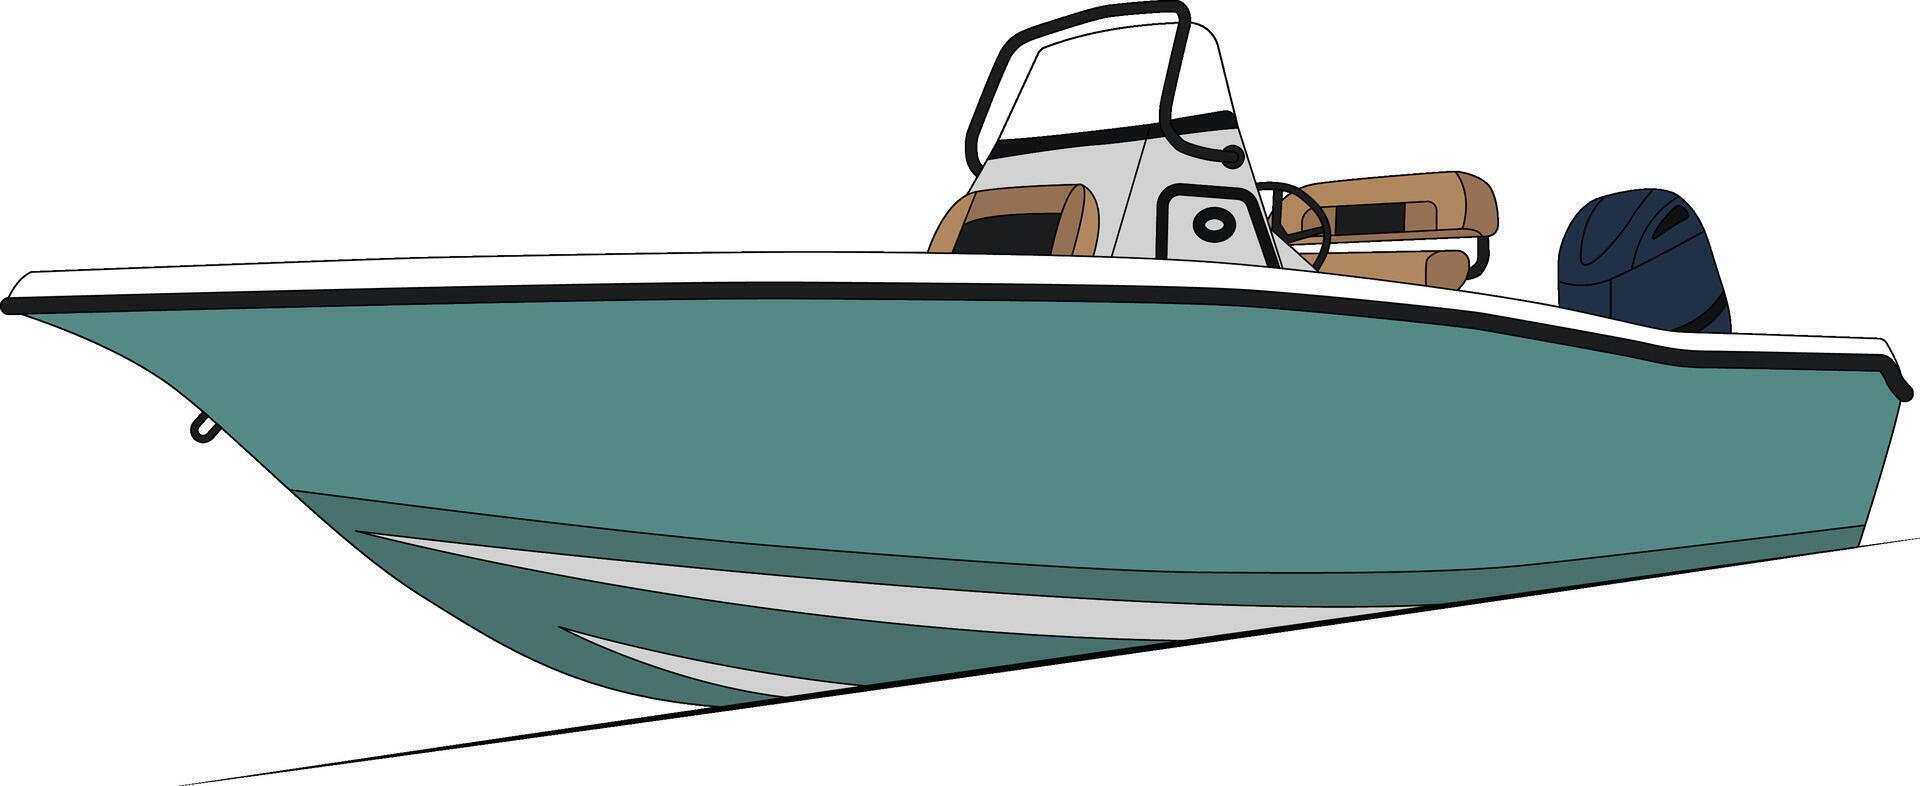 Fornt view fishing boat vector